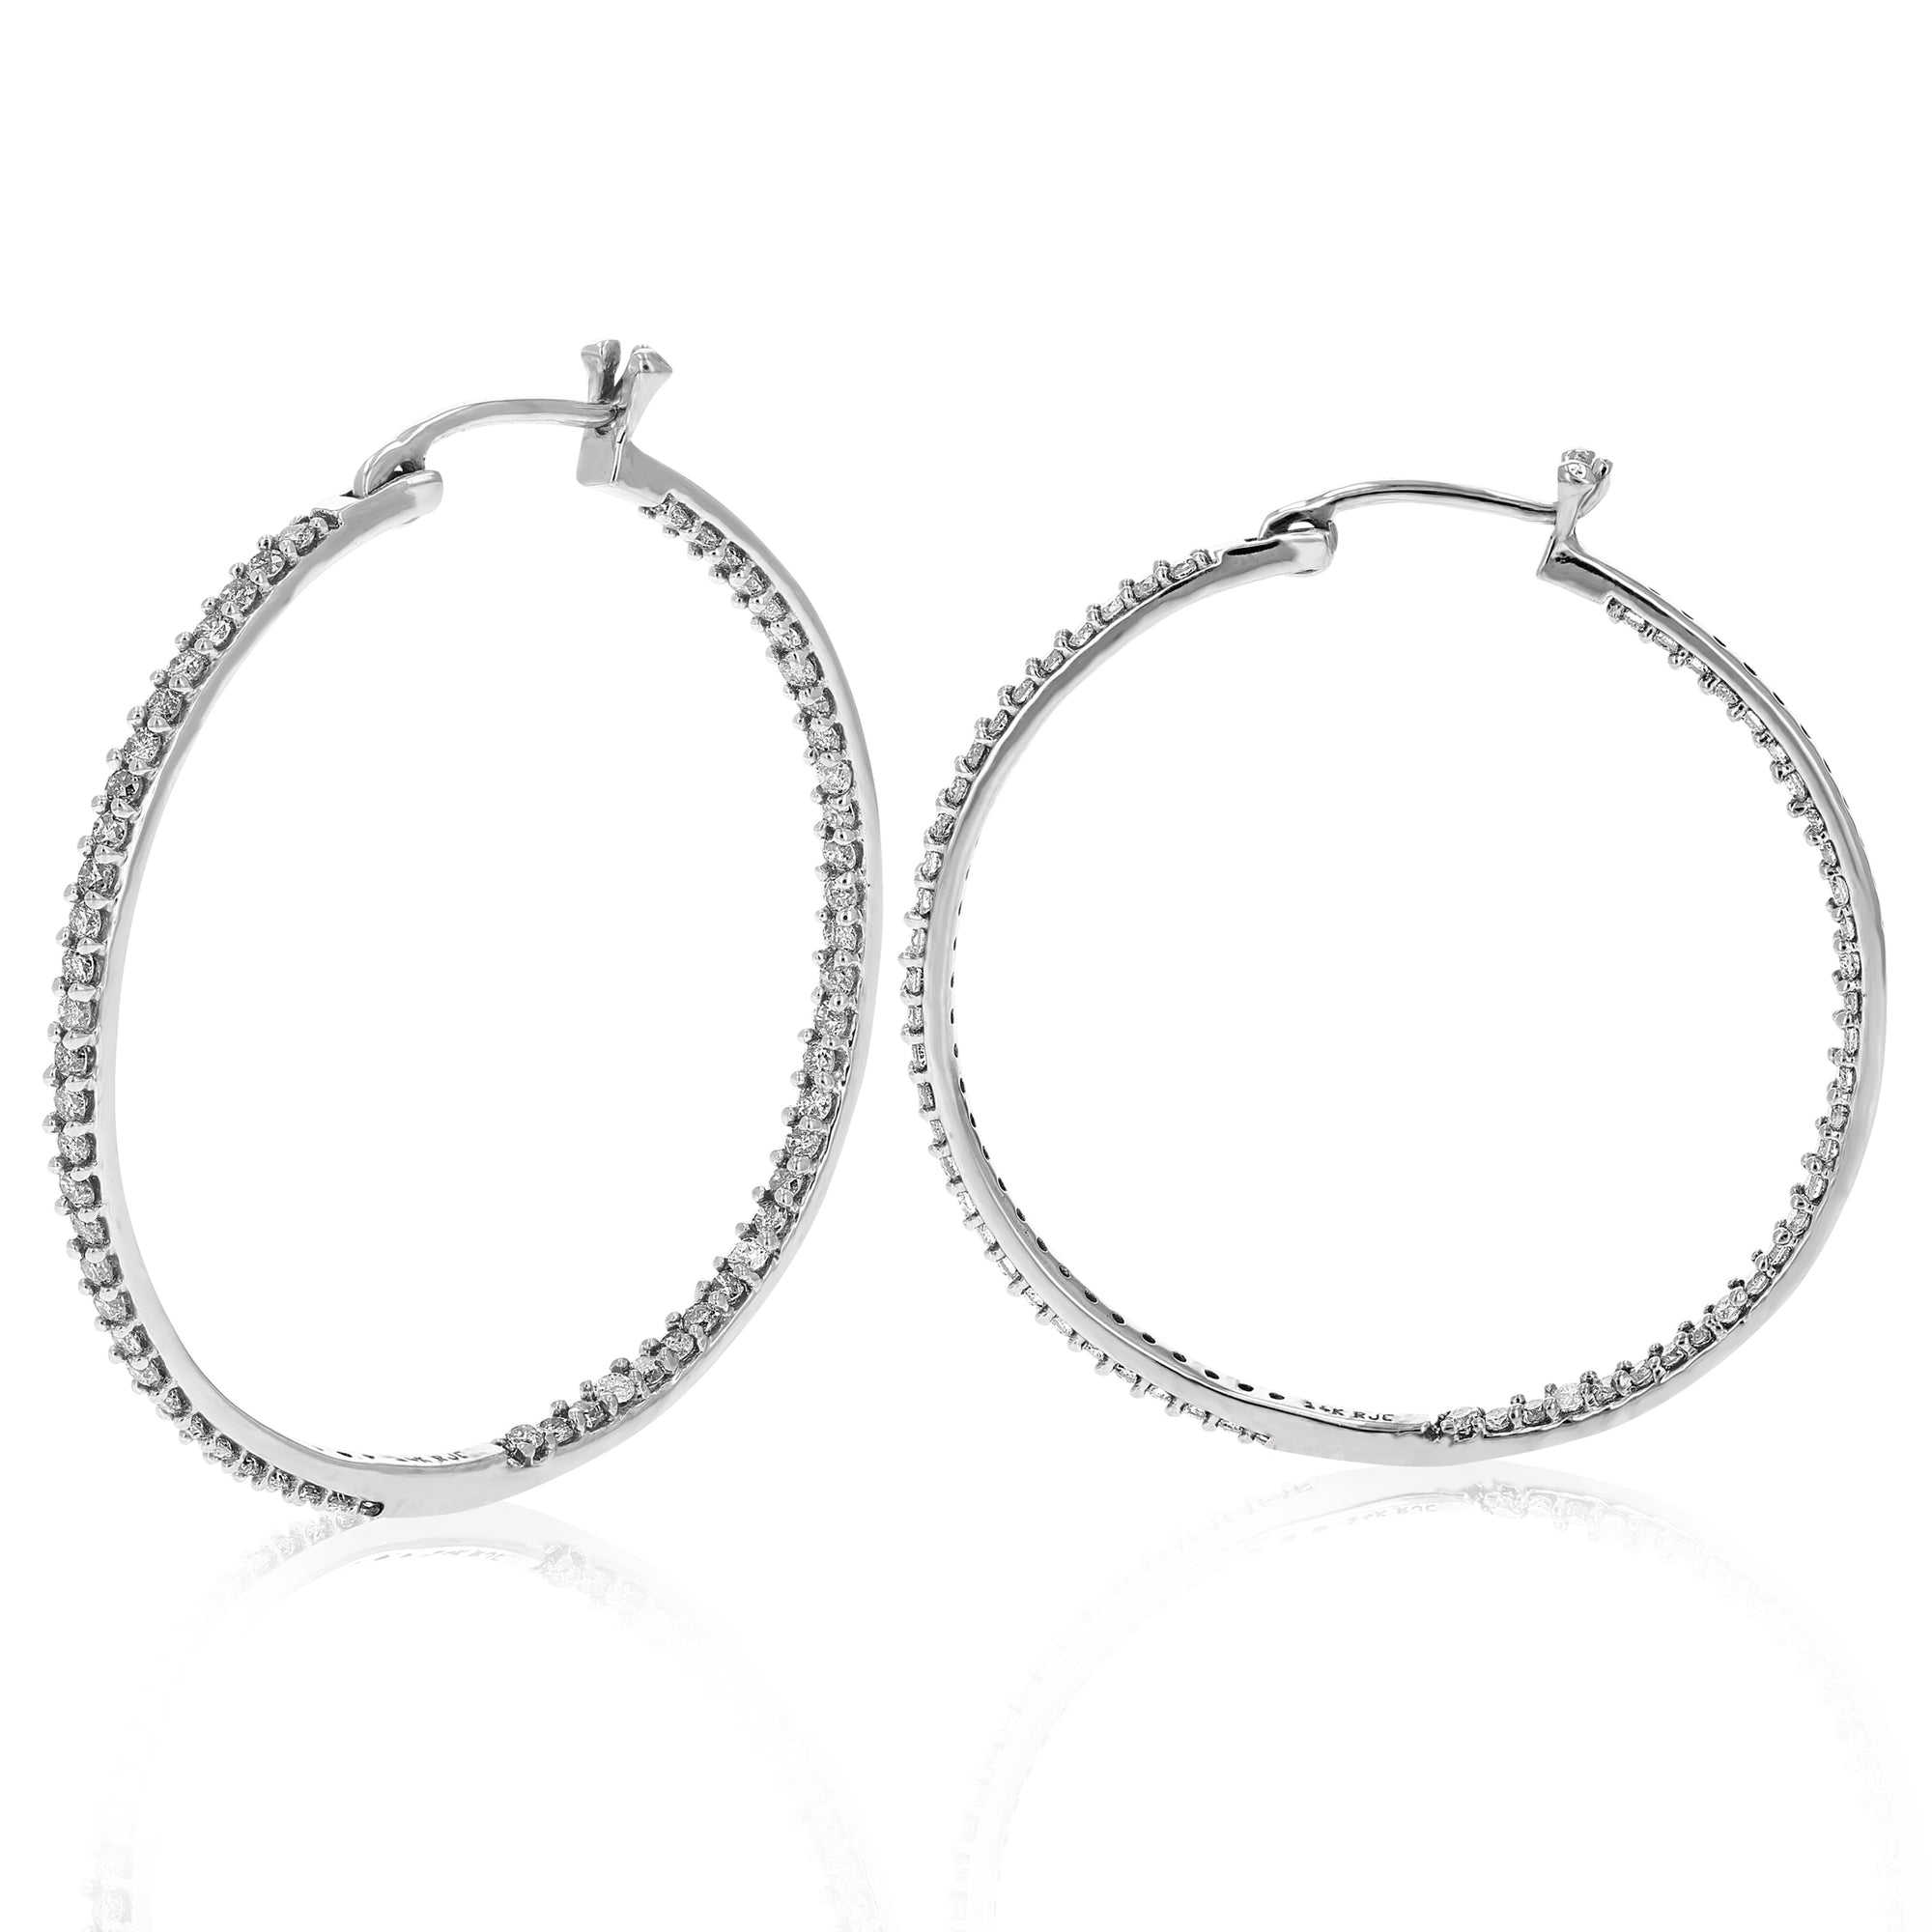 1 cttw Diamond Inside Out Hoop Earrings 14K White Gold Round Prong Set 1 Inch